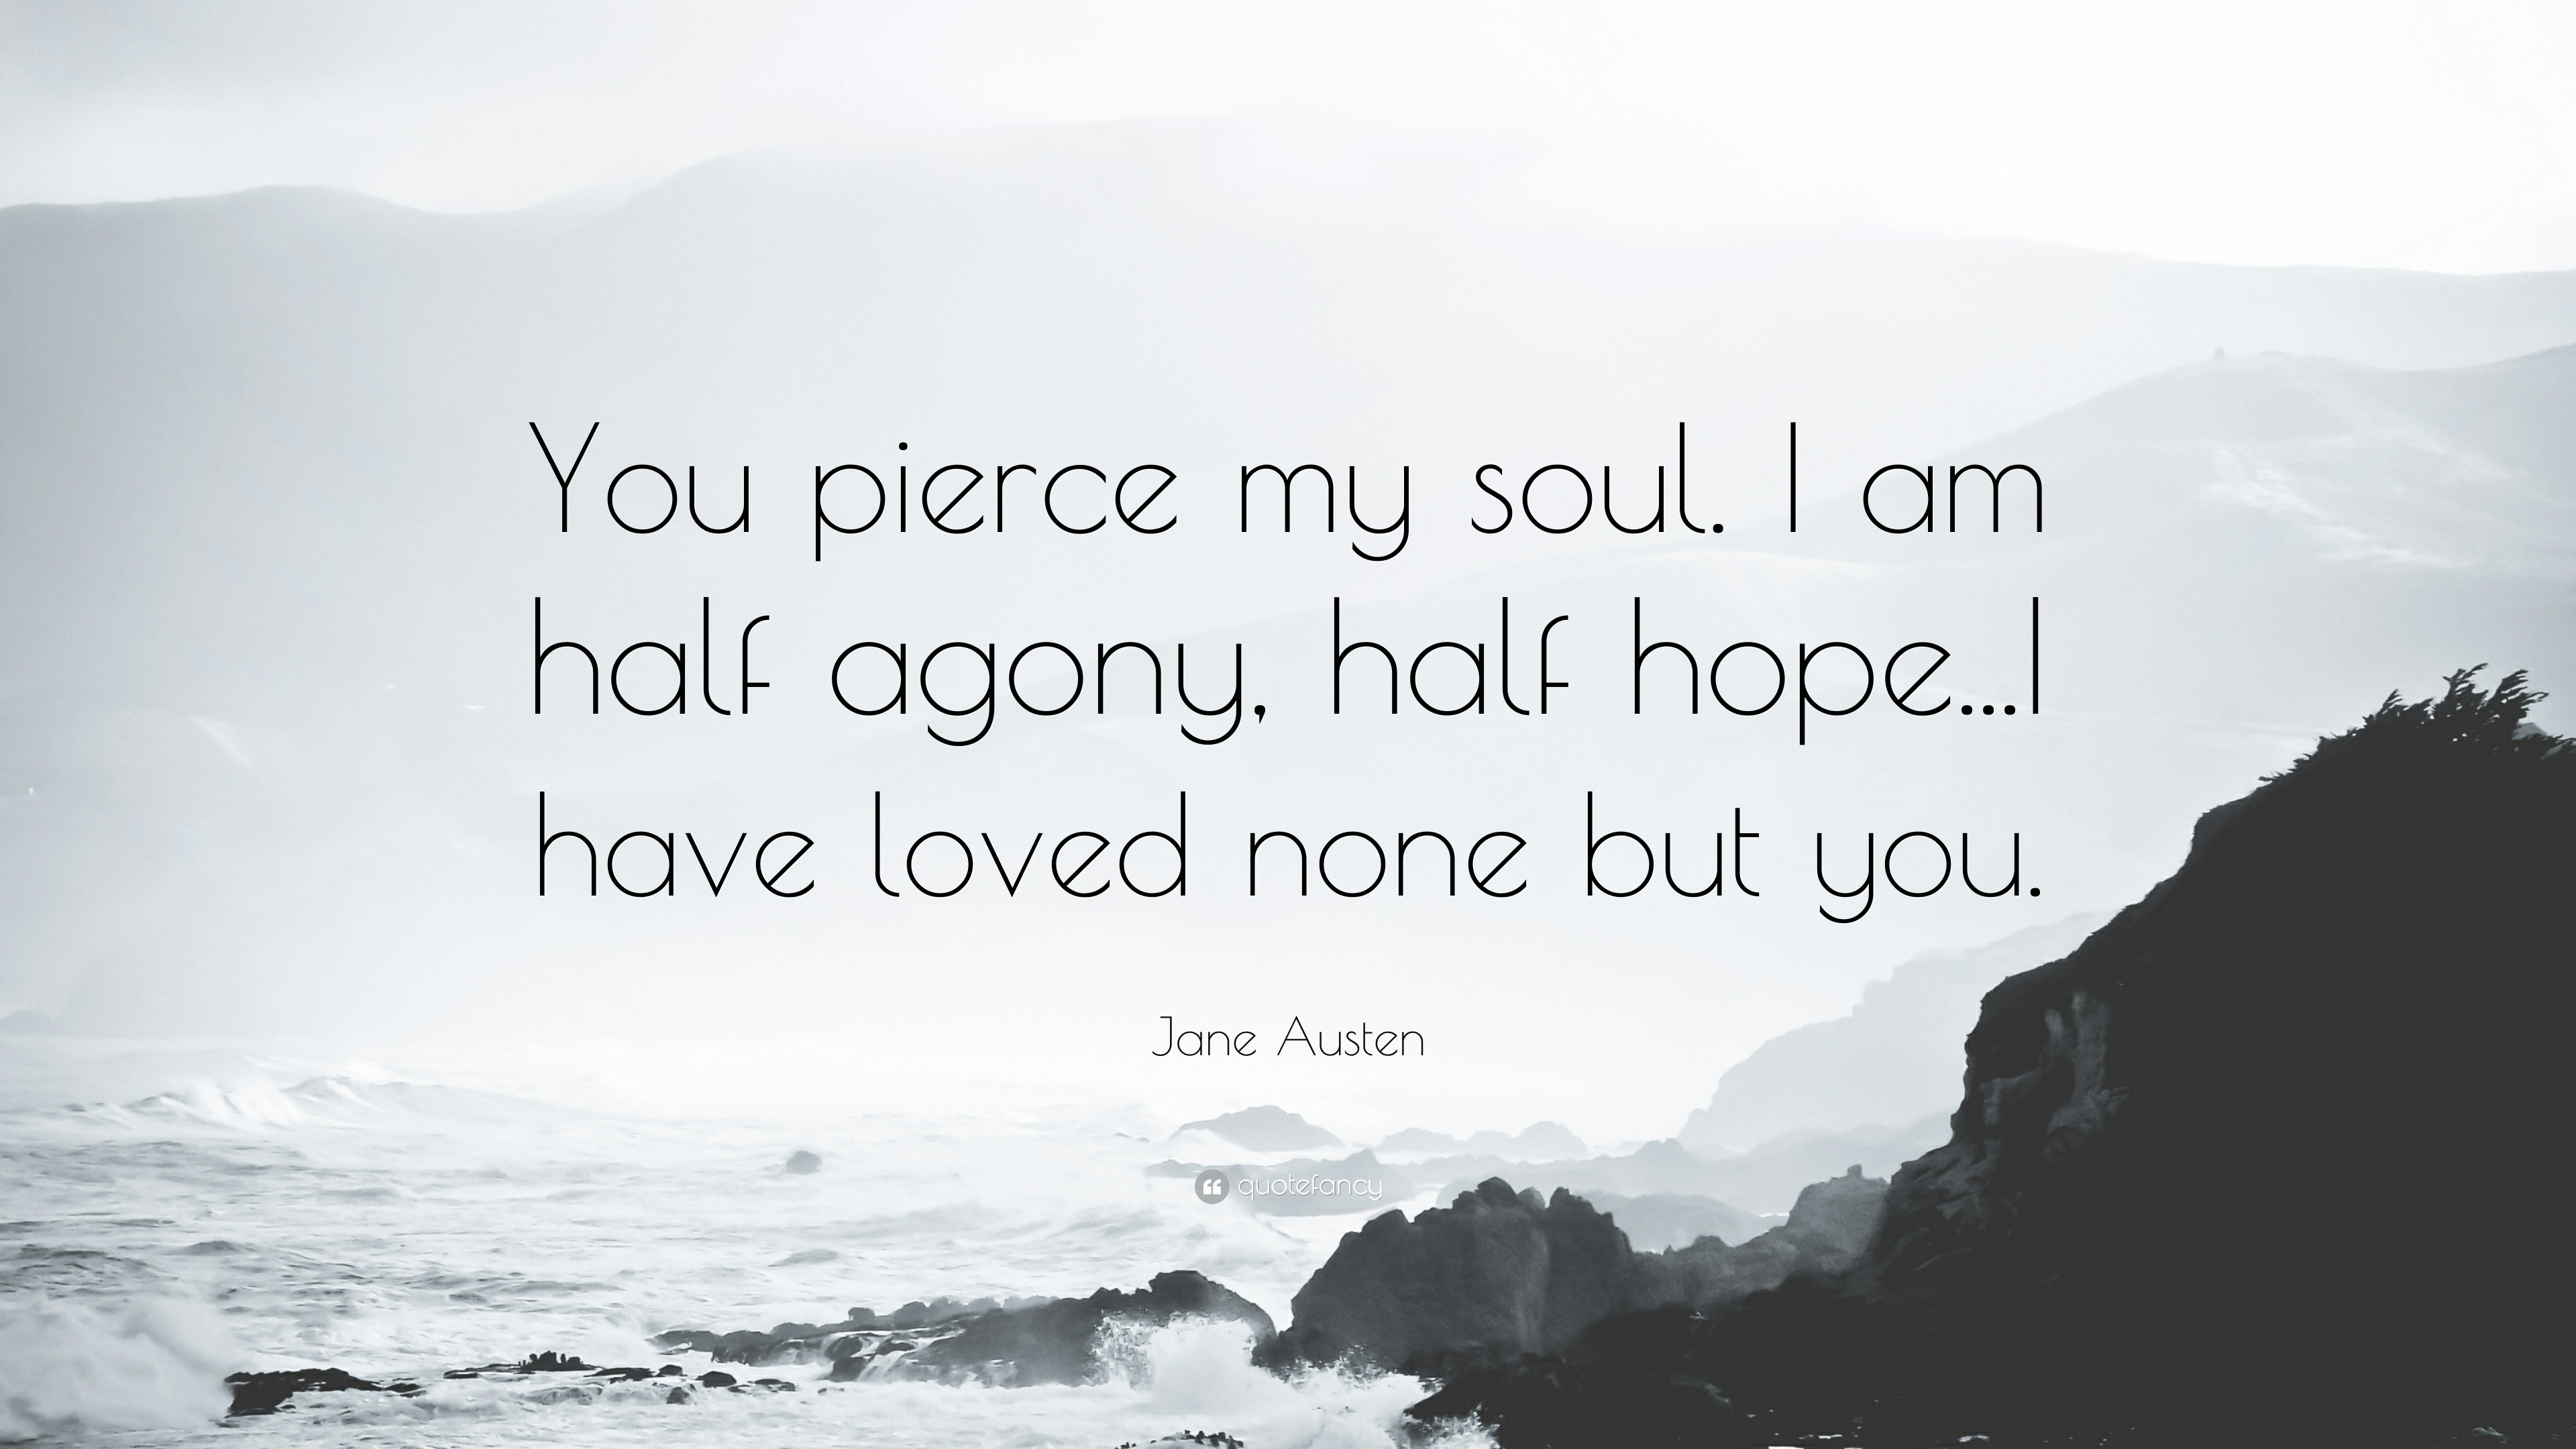 Jane Austen Quote: “You pierce my soul. I am half agony, half hope...I have  loved